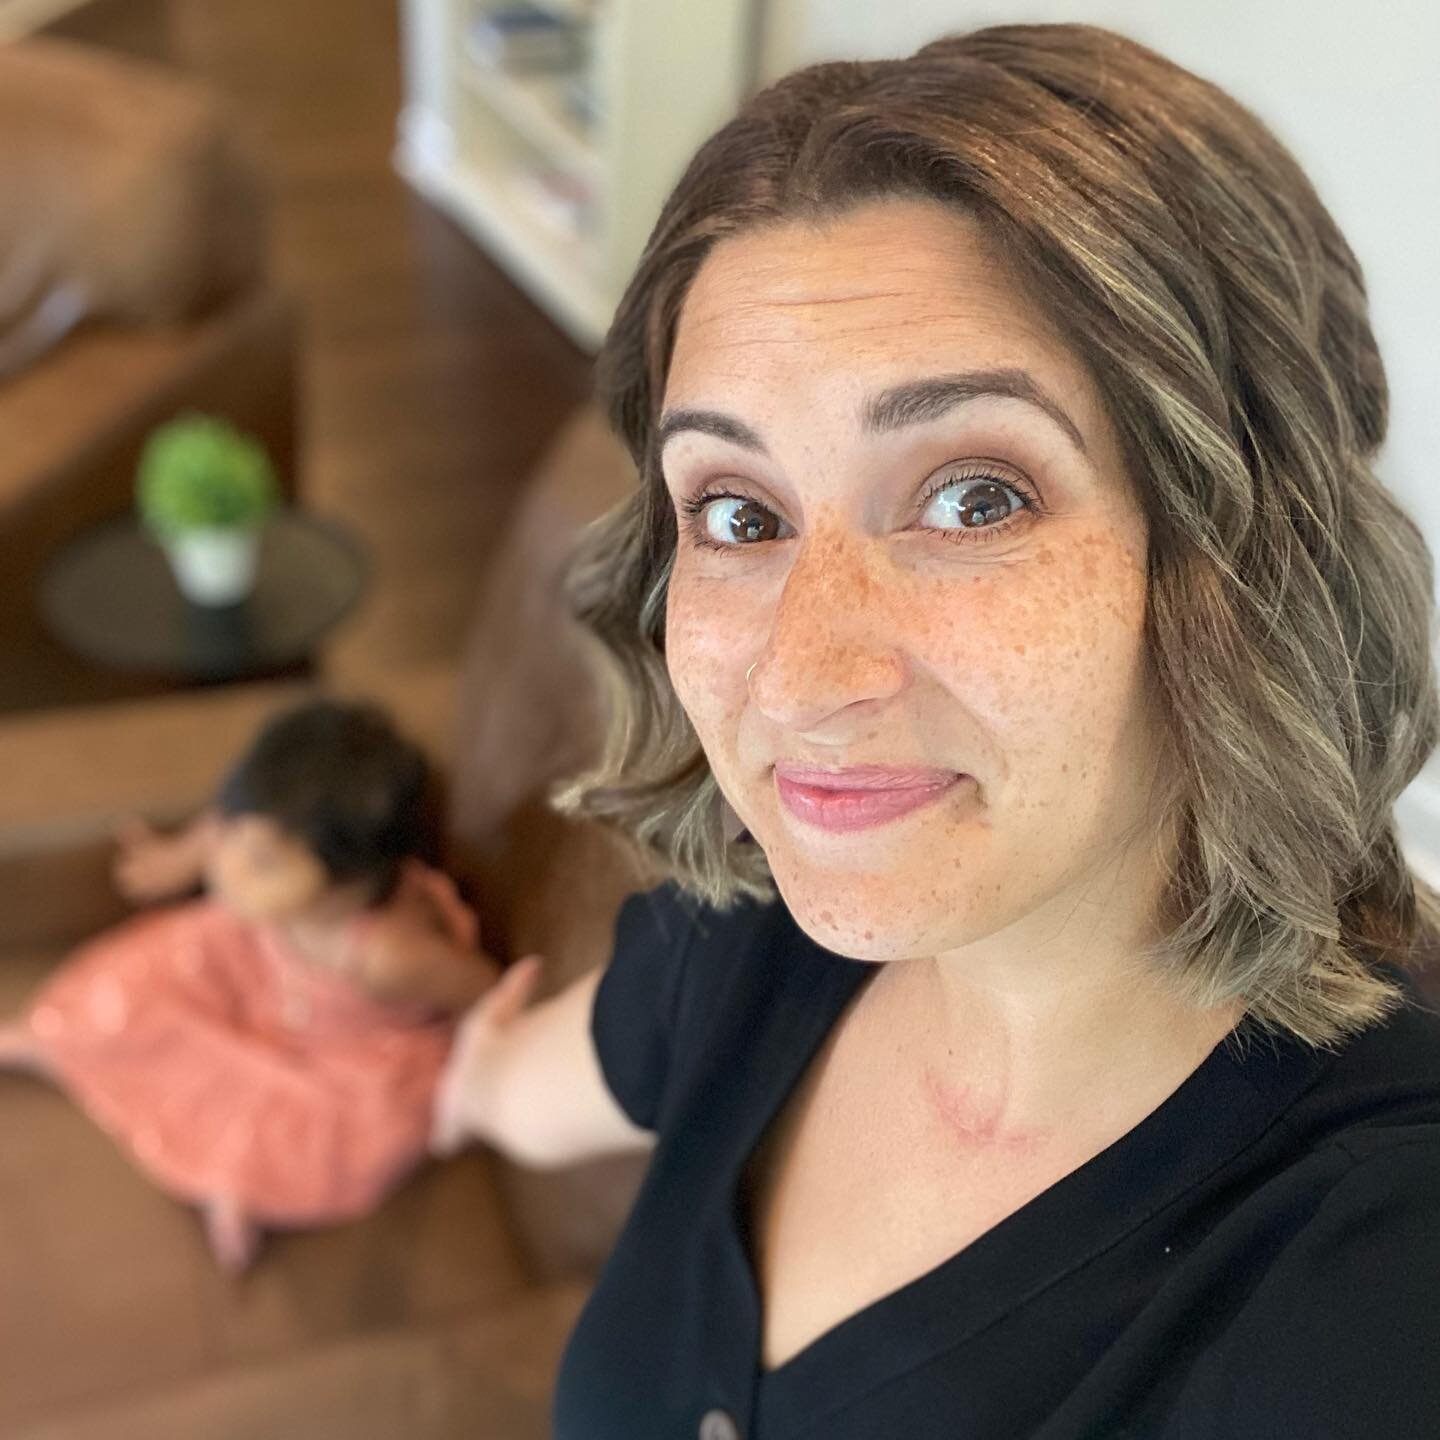 ✨Hey #mixfam my name is Brittany or as many of you know me, The Almost Indian Wife!✨

I wanted to take a second to share a few things you may not know about me. 

✨As you can see, every morning Emmy and I snuggle and watch cartoons! 

✨I&rsquo;m whit